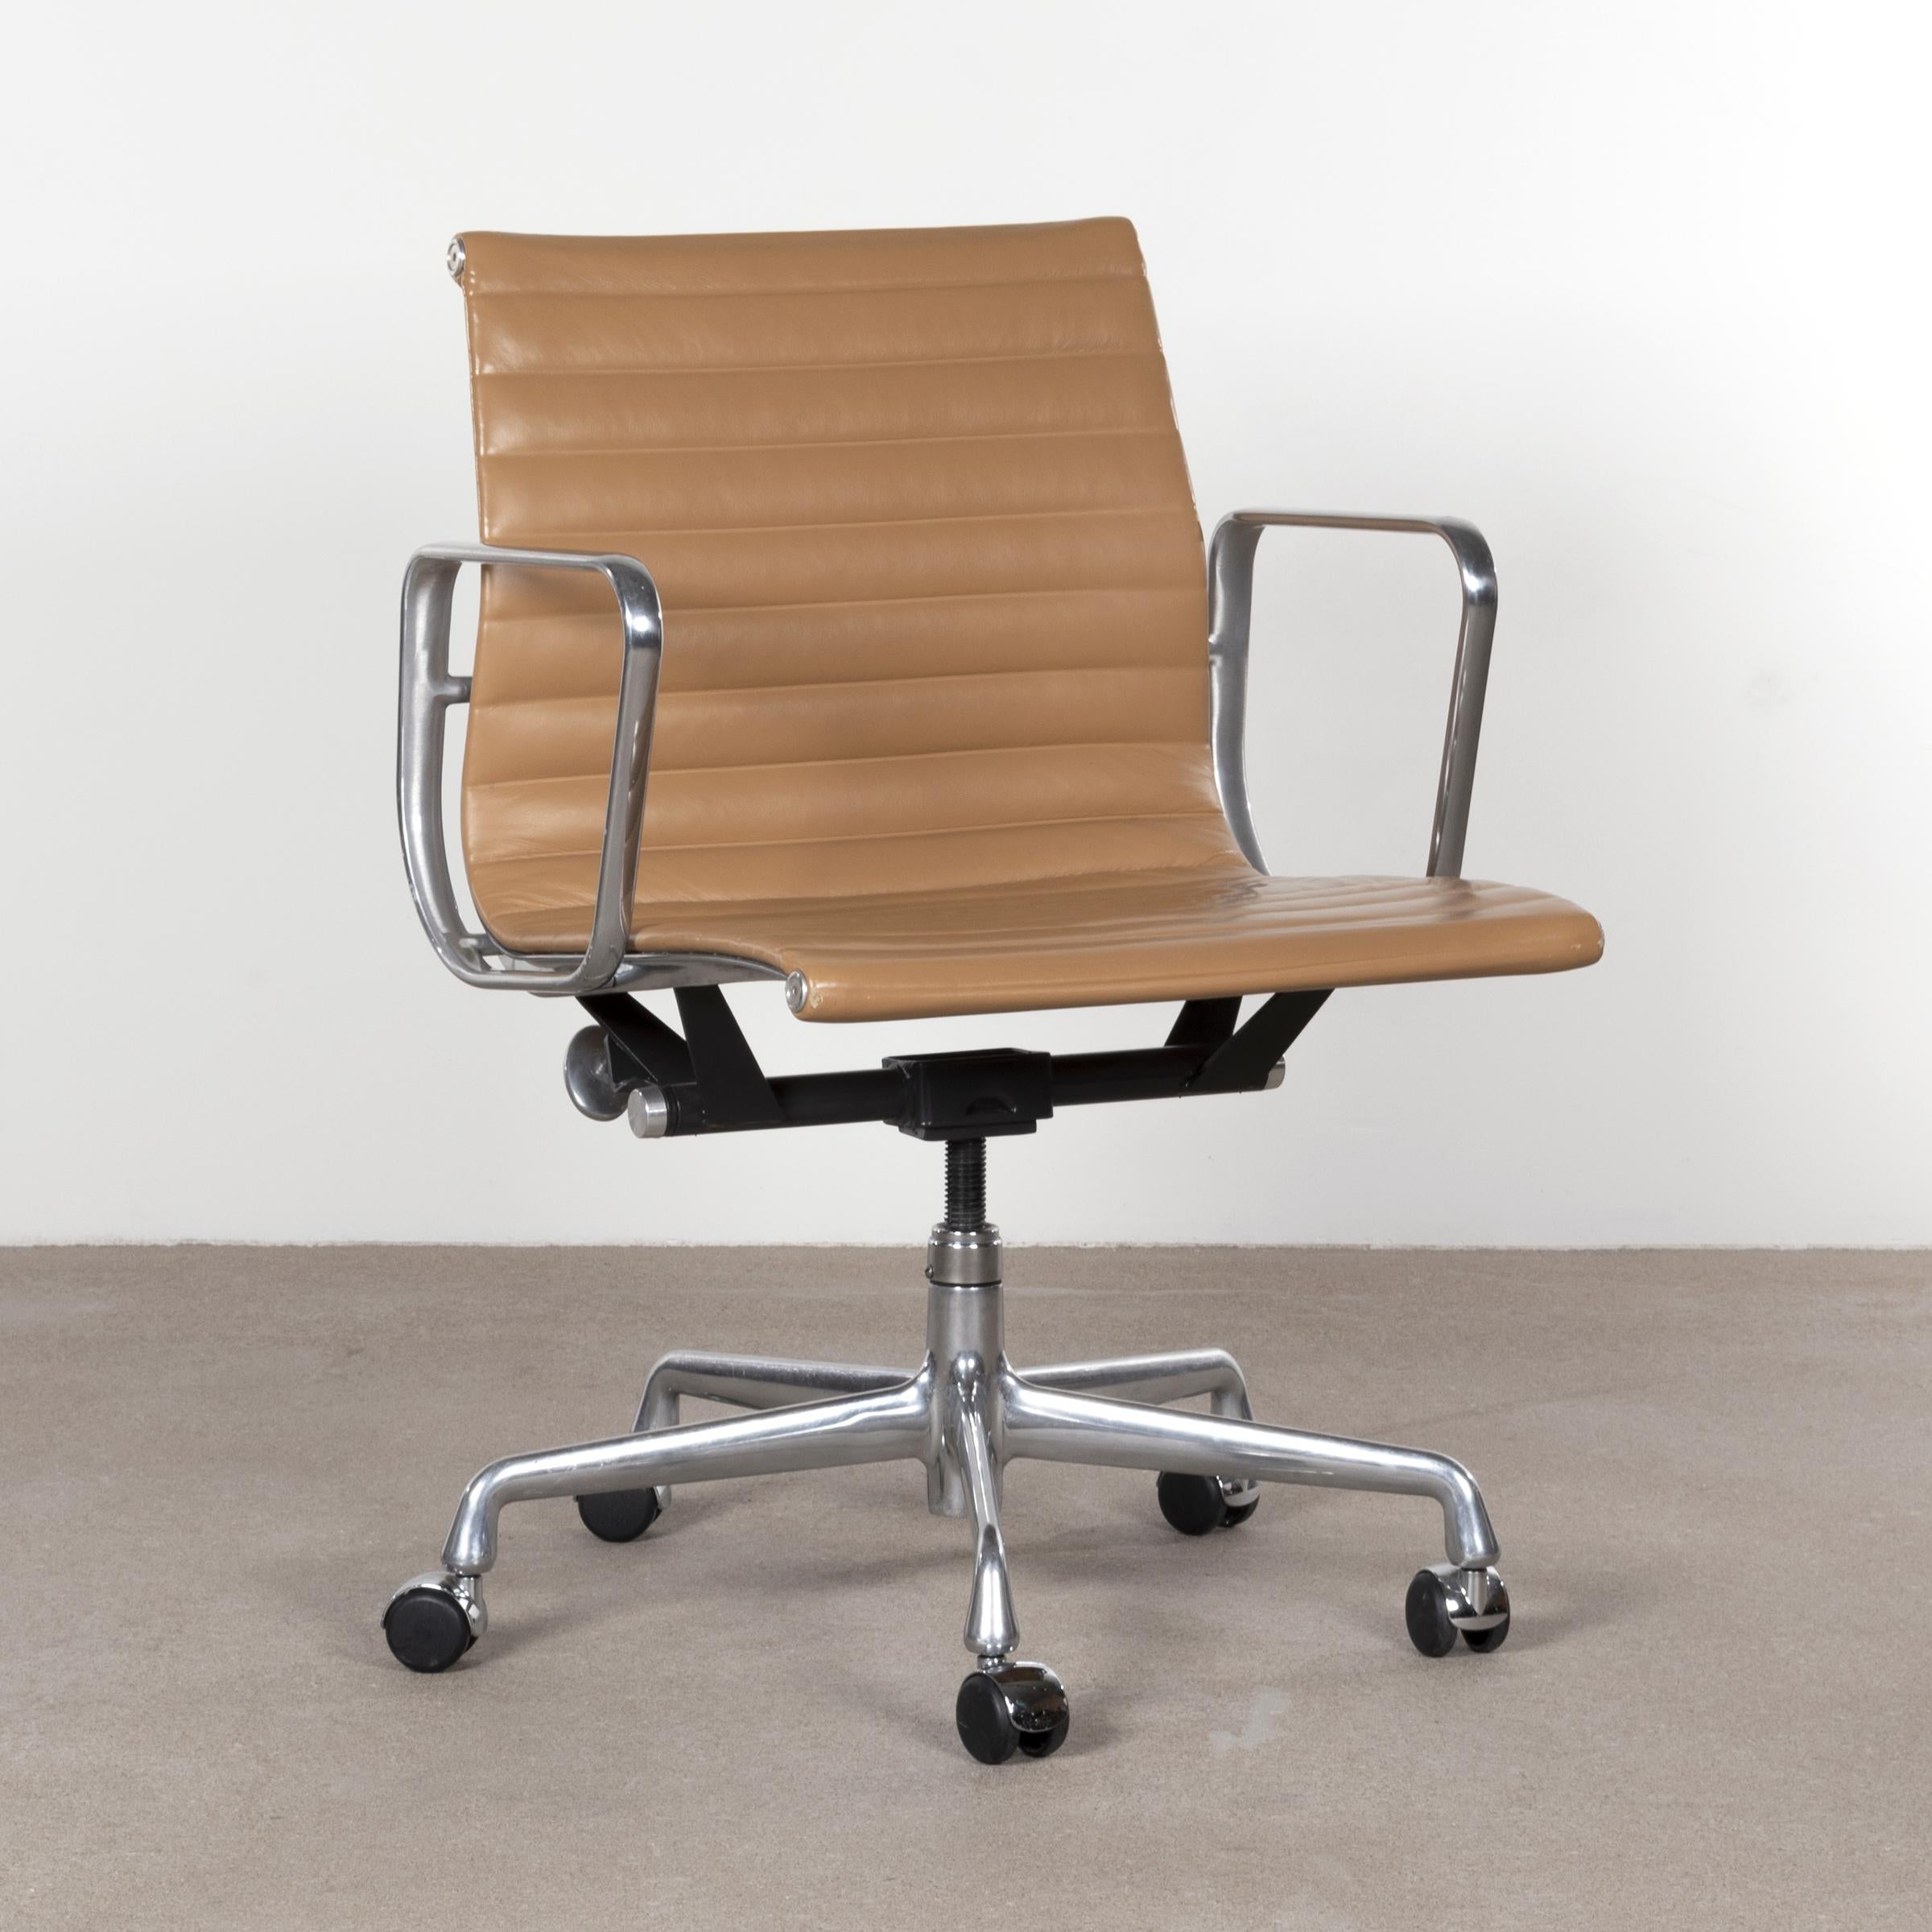 American Eames Management Office Chair in Cognac Leather for Herman Miller, USA